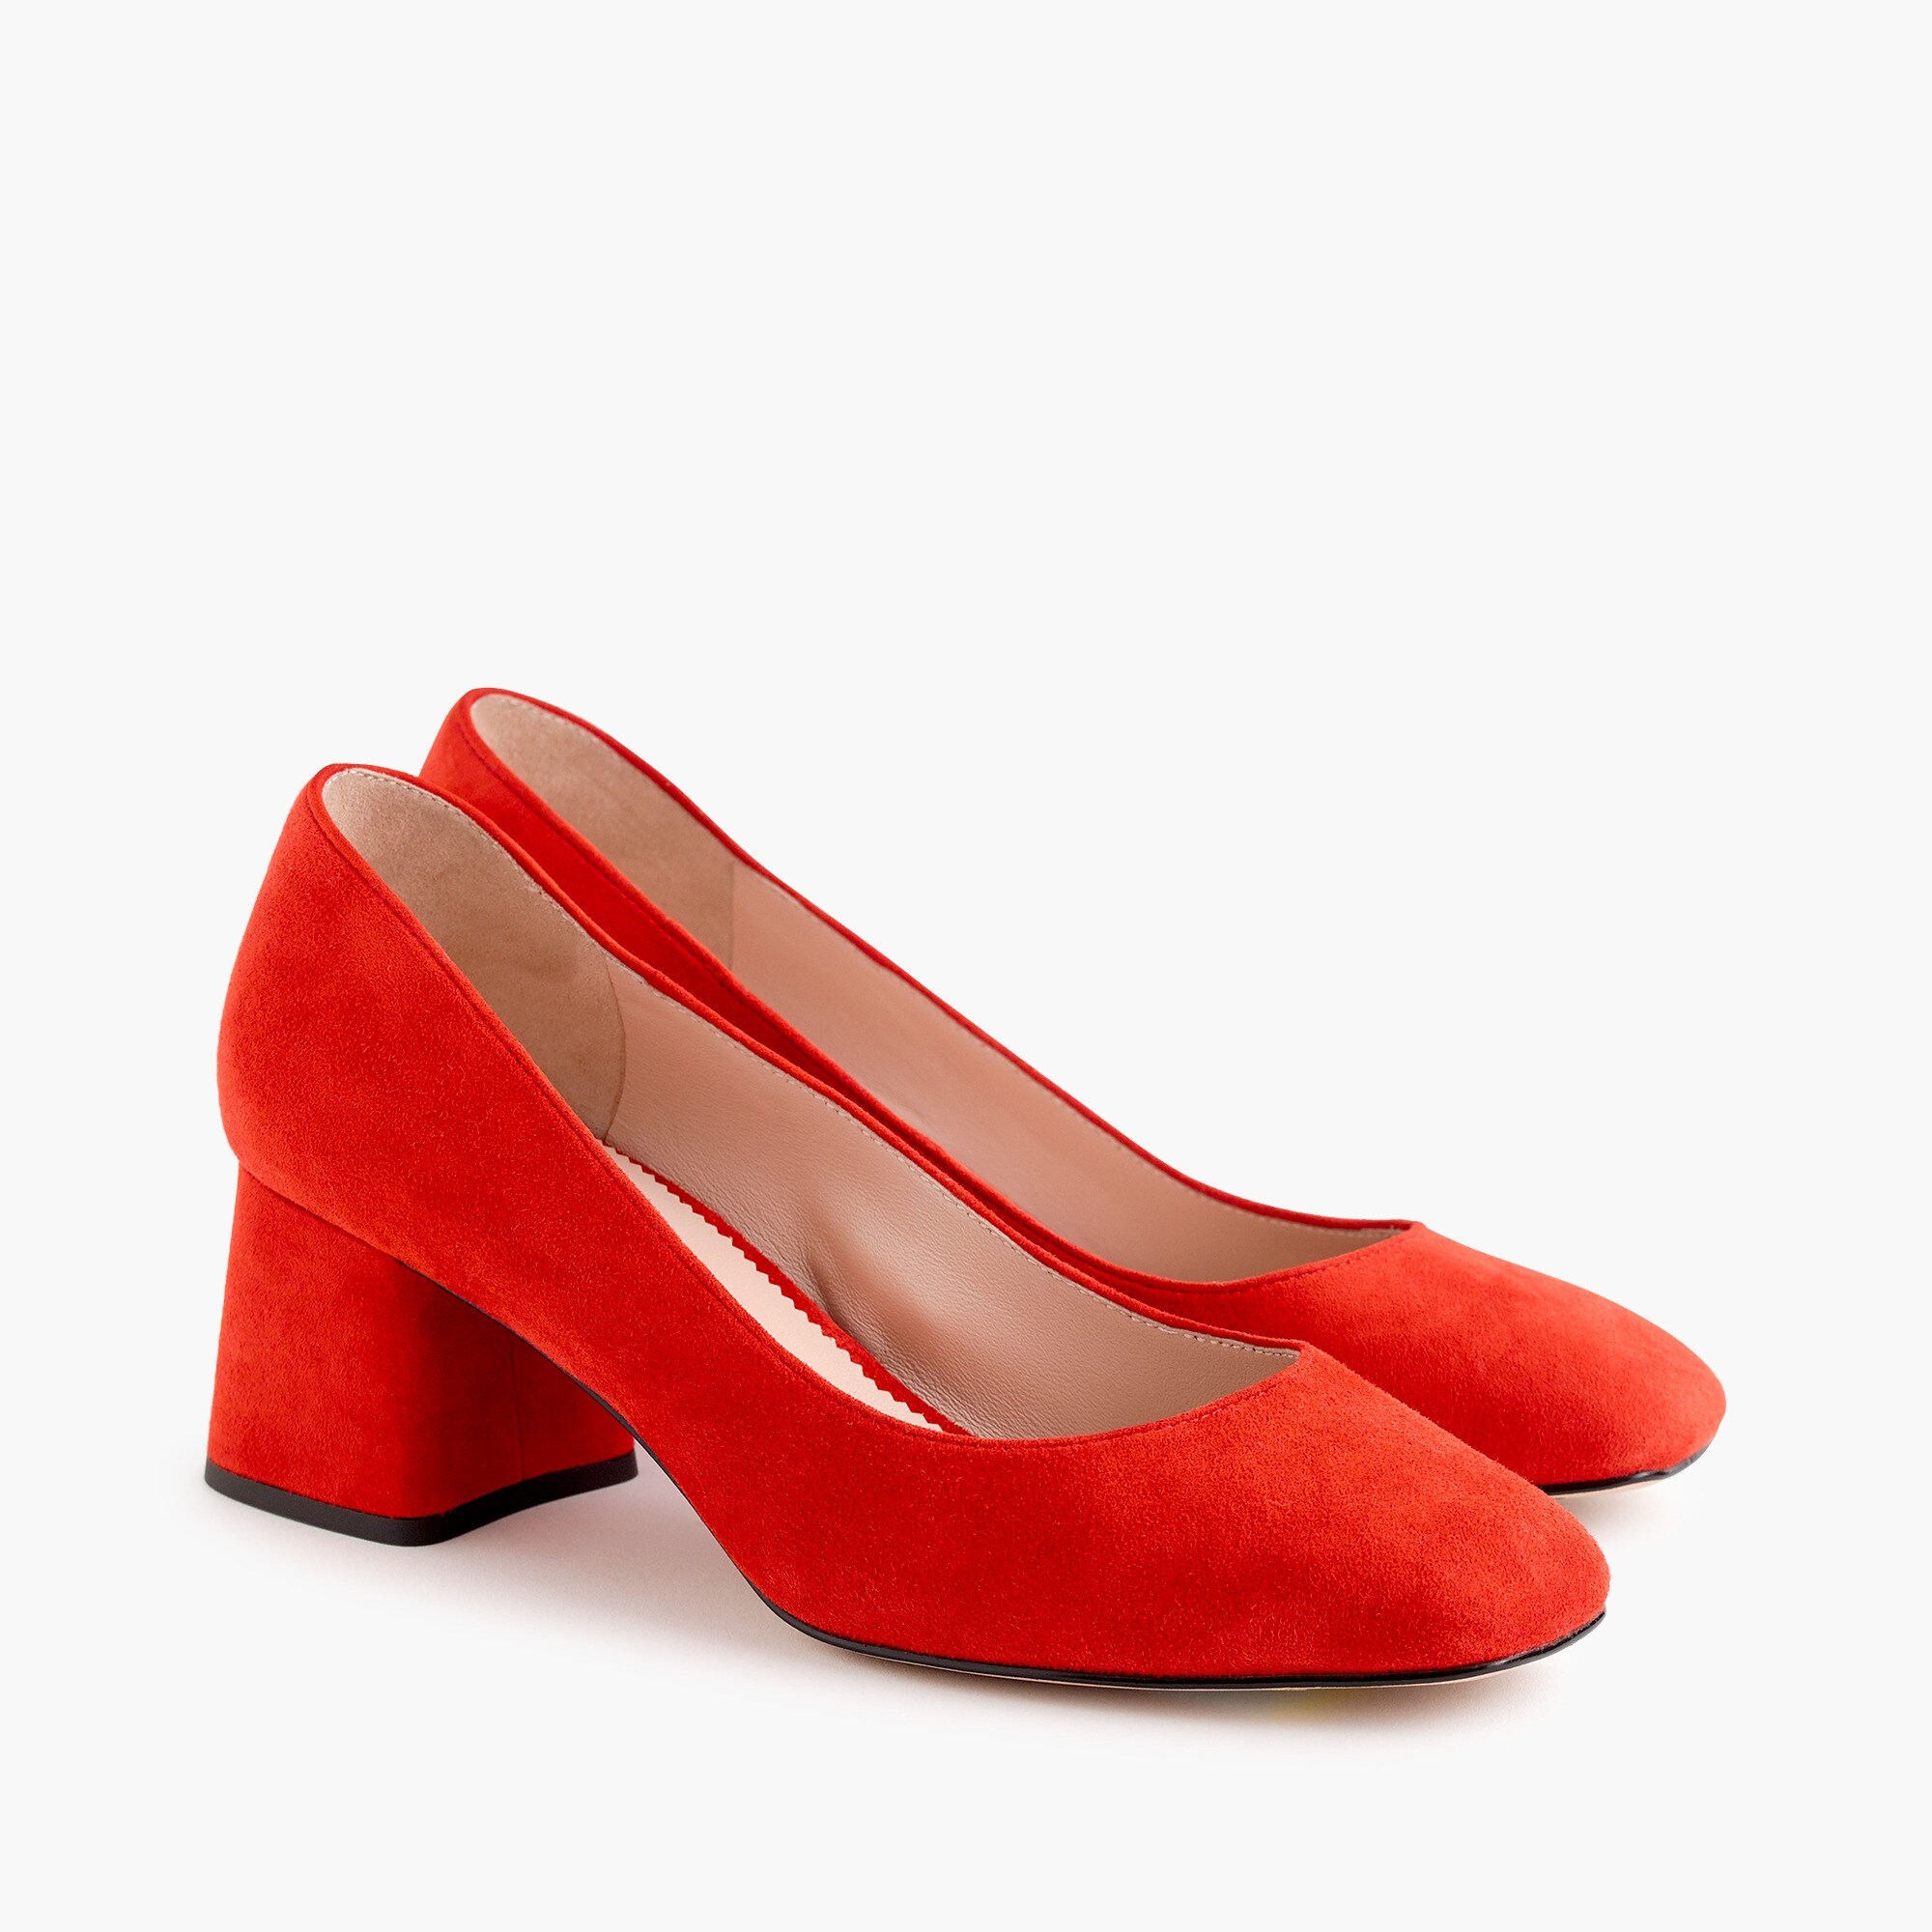 Shoes for Women: Boots, Heels, Flats, Sandals, Loafers | J.Crew